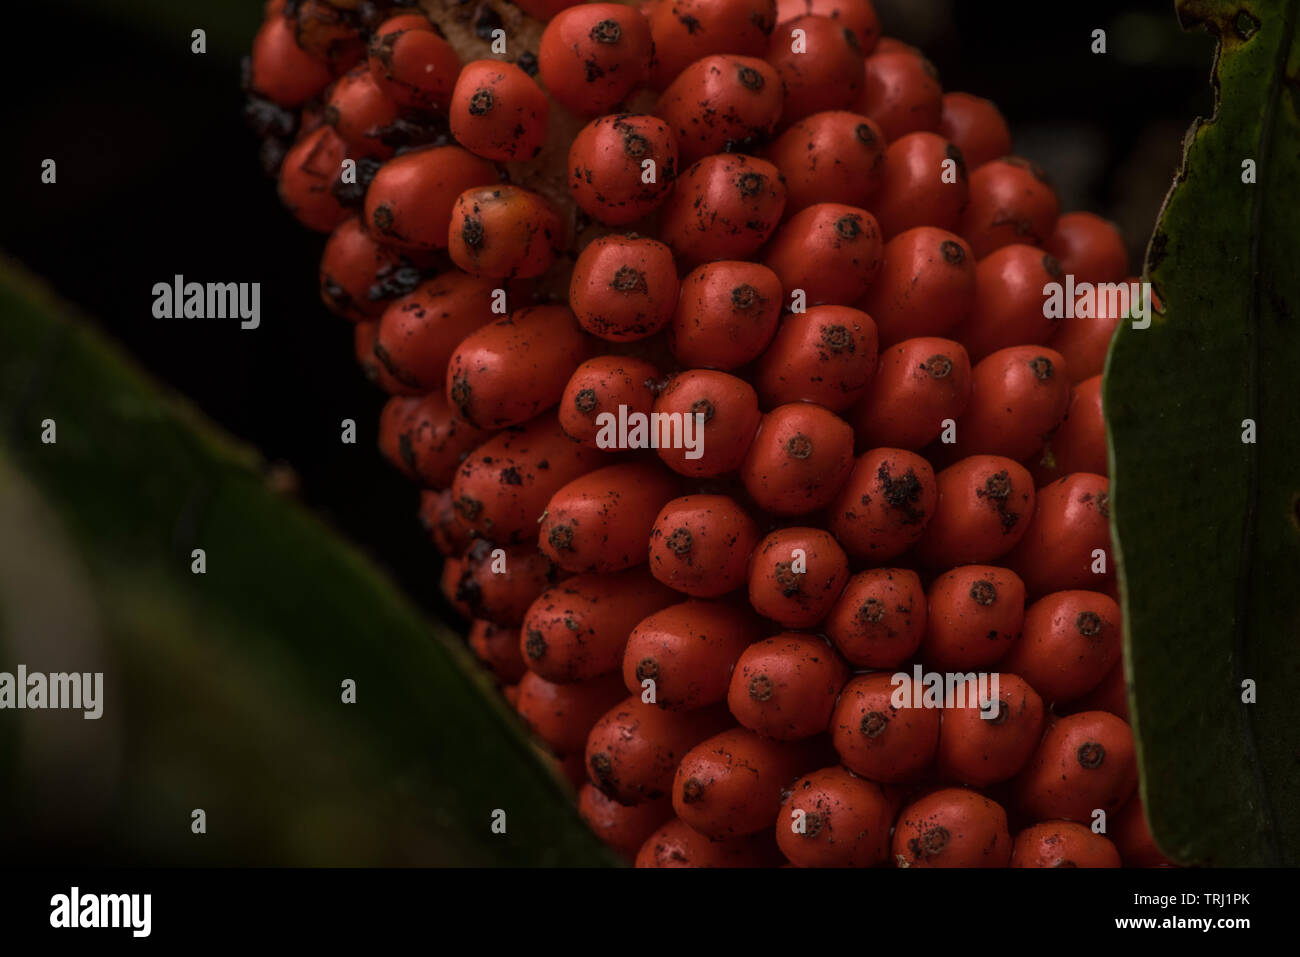 Some sort of red seeds from a plant in the Amazon rainforest in yasuni national park, Ecuador. Stock Photo